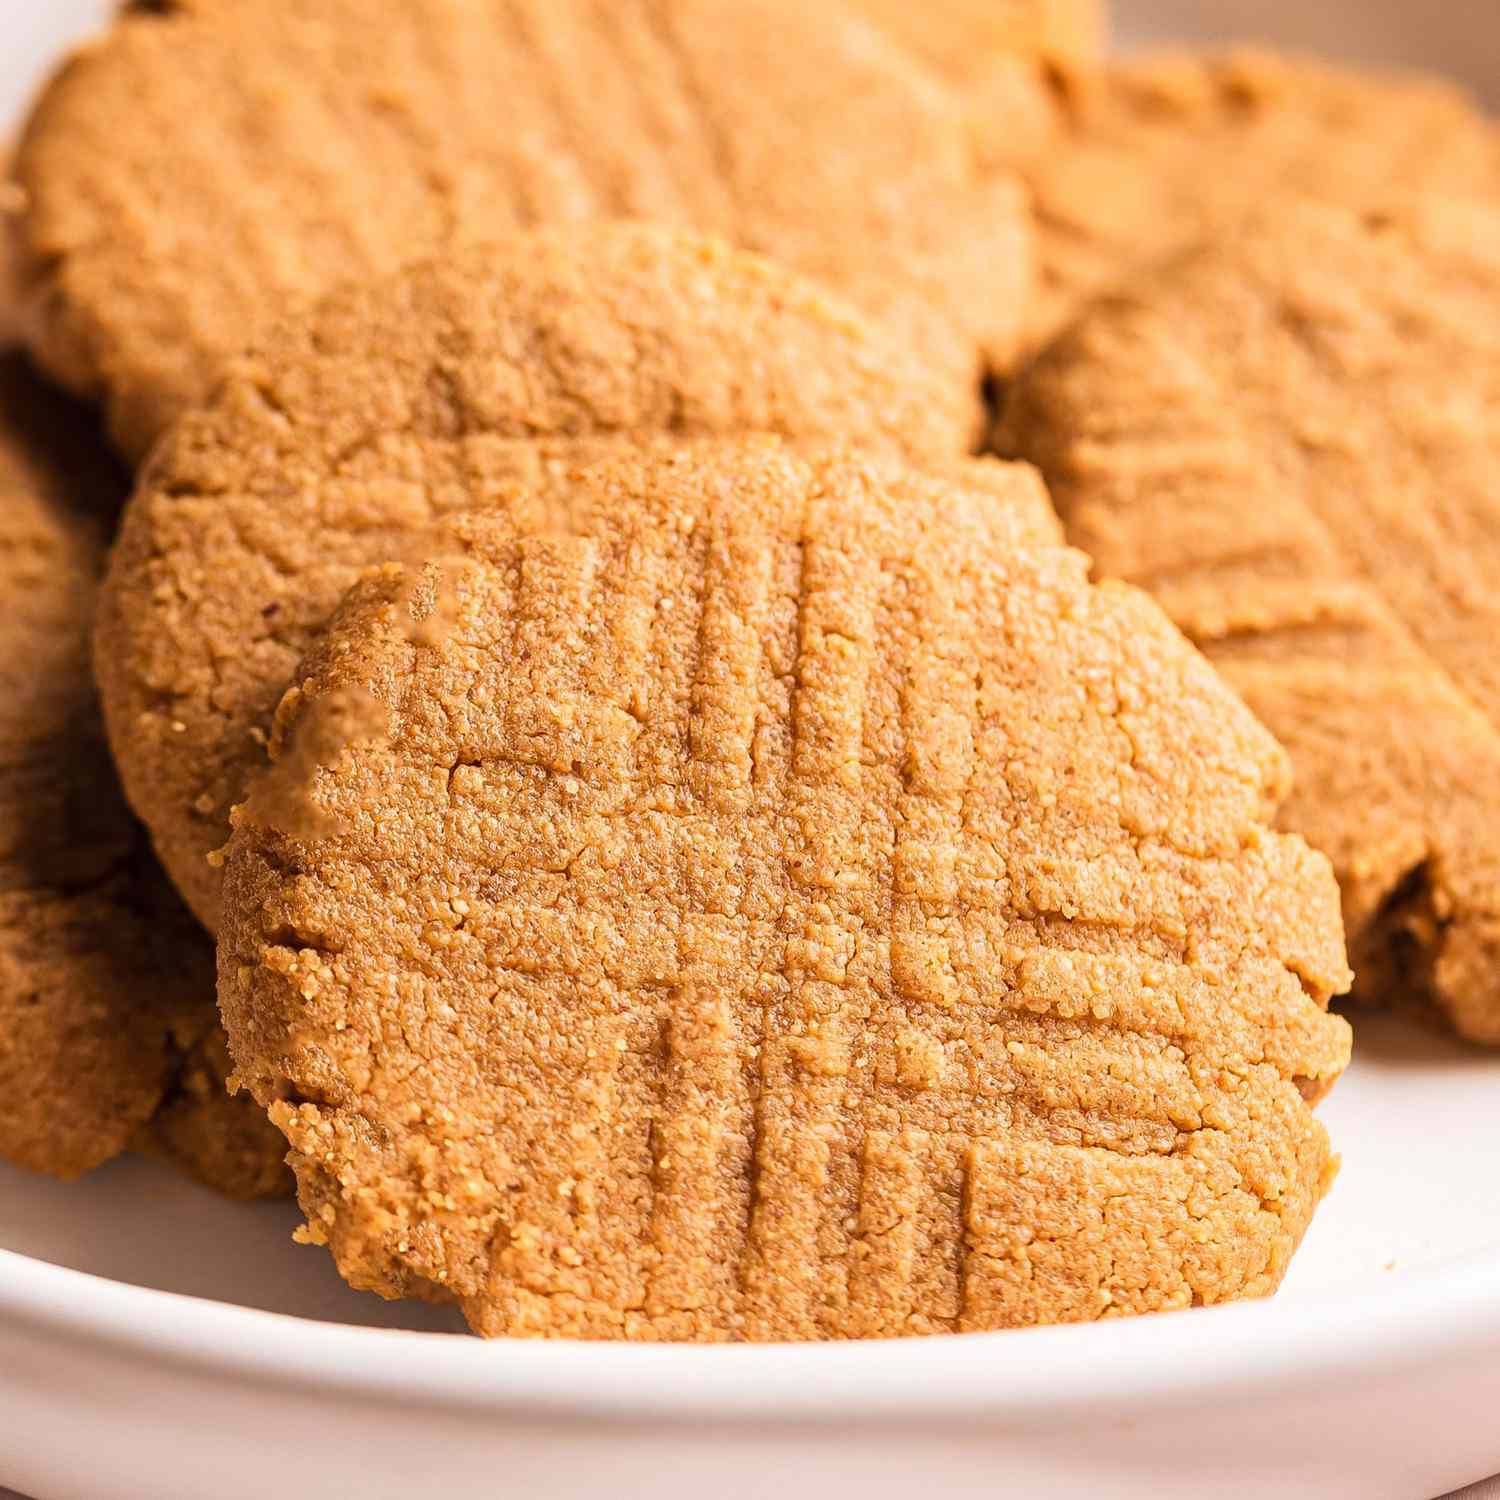 a close up view of a pile of freshly baked peanut butter cookies